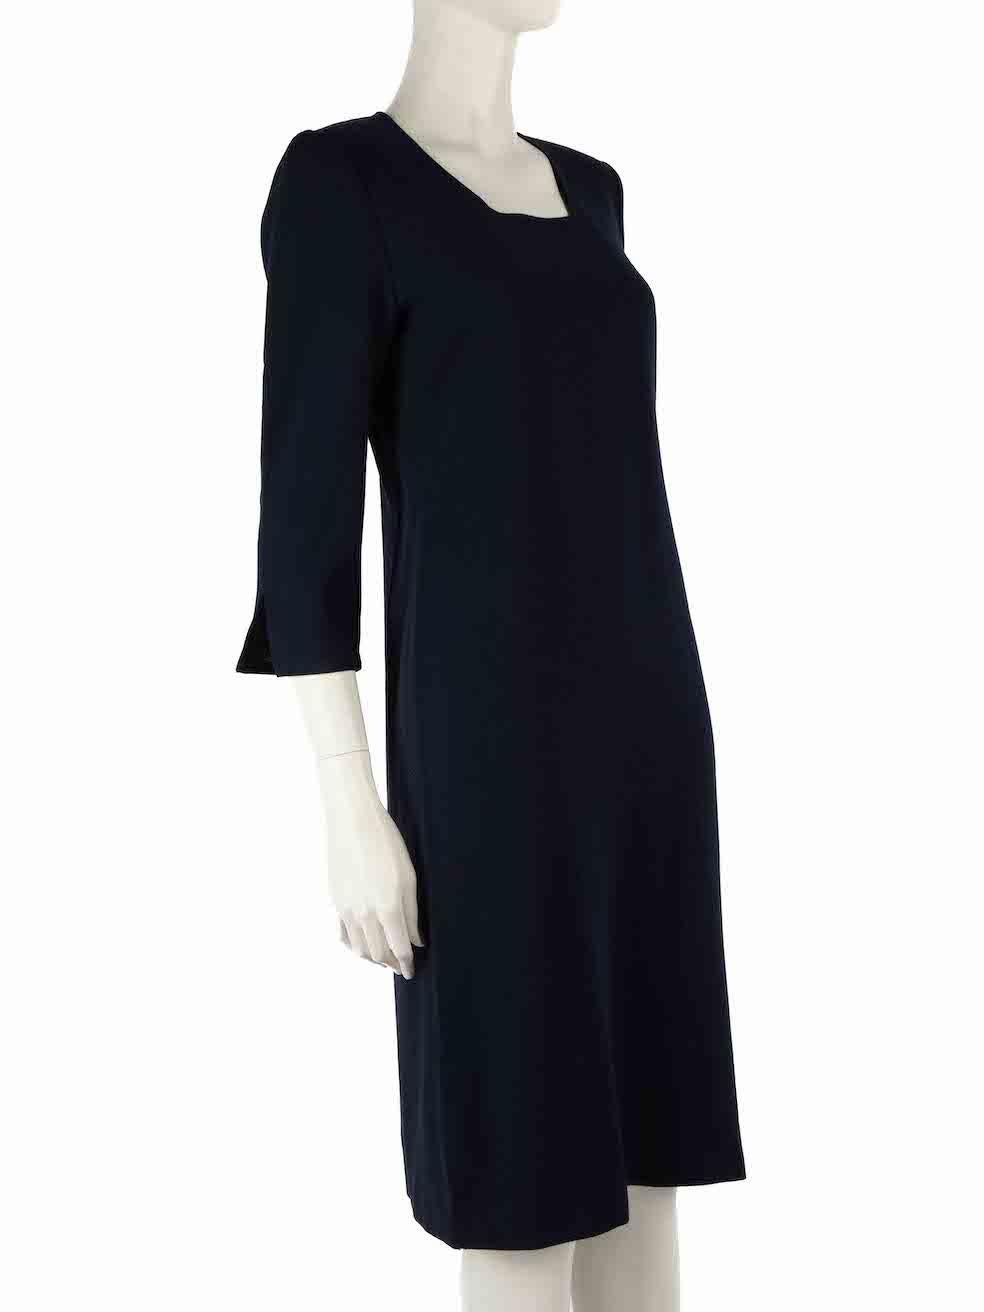 CONDITION is Very good. Hardly any visible wear to dress is evident on this used Jean Muir designer resale item.
 
 
 
 Details
 
 
 Navy
 
 Wool
 
 Dress
 
 Midi
 
 Long sleeves
 
 Square neckline
 
 Back zip and hook fastening
 
 Shoulder pads
 
